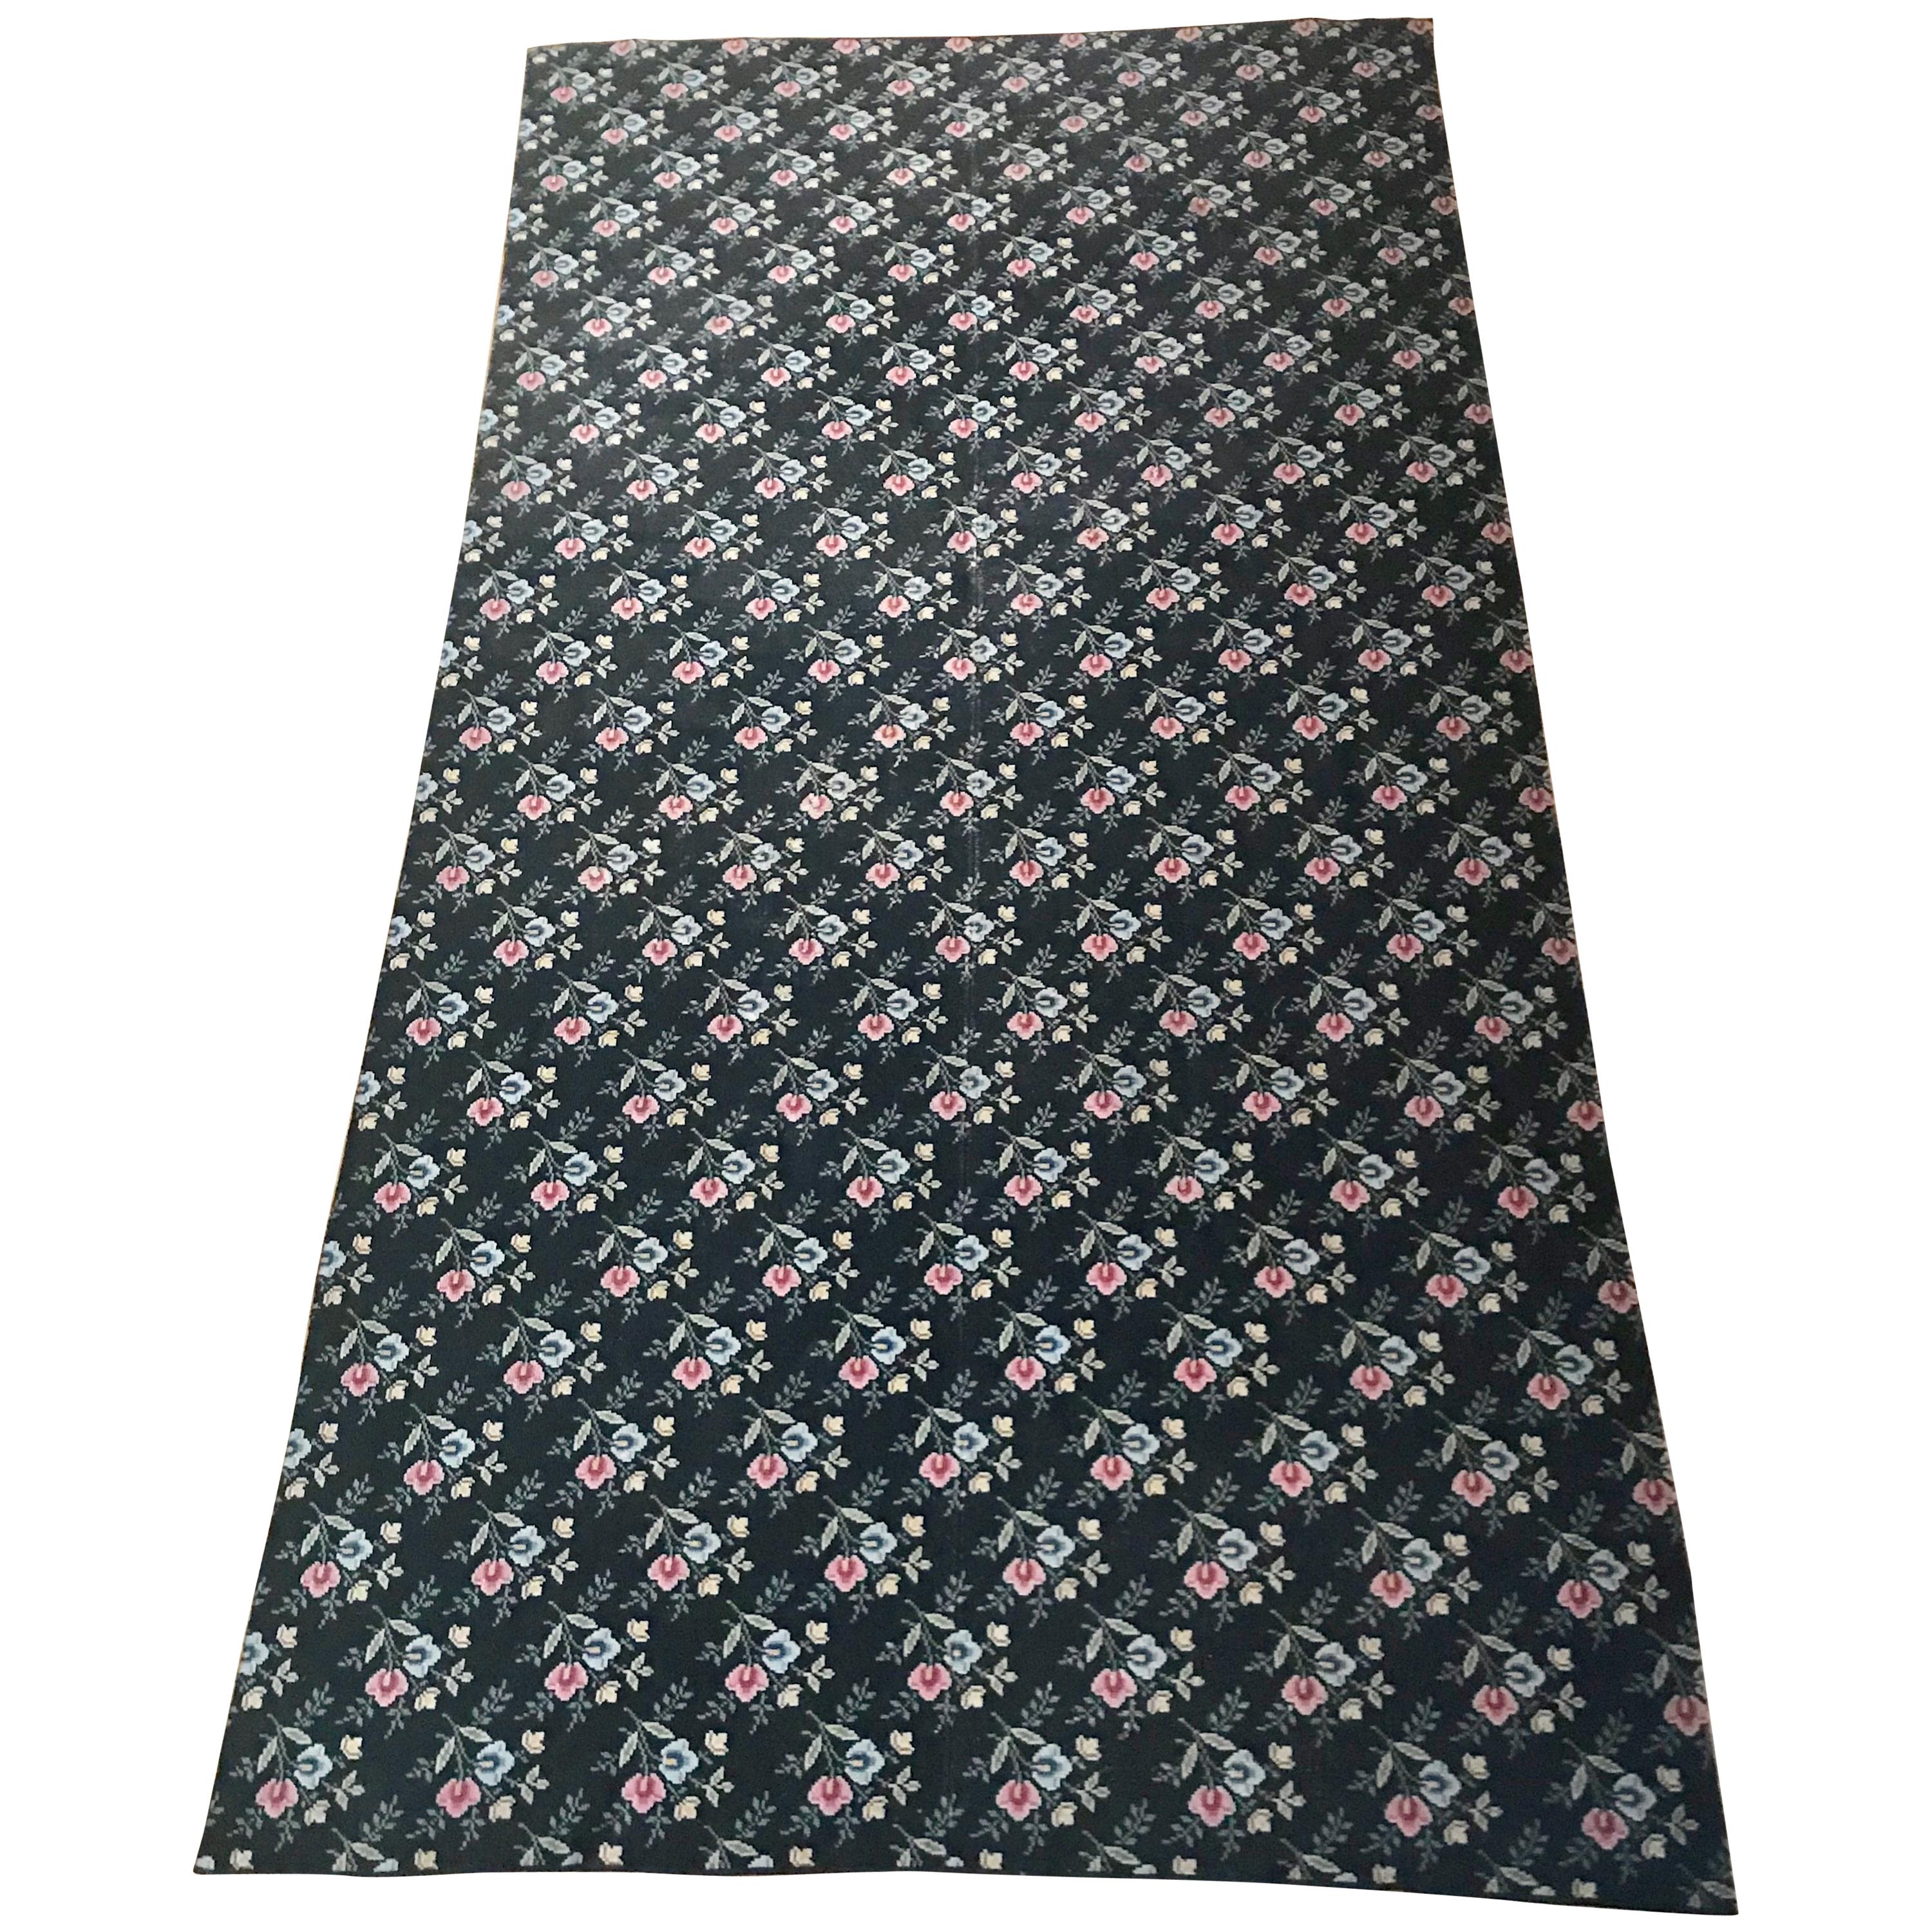 Huge Antique Black French Cross Stitch Wool Carpet Madeleine Castaing For Sale